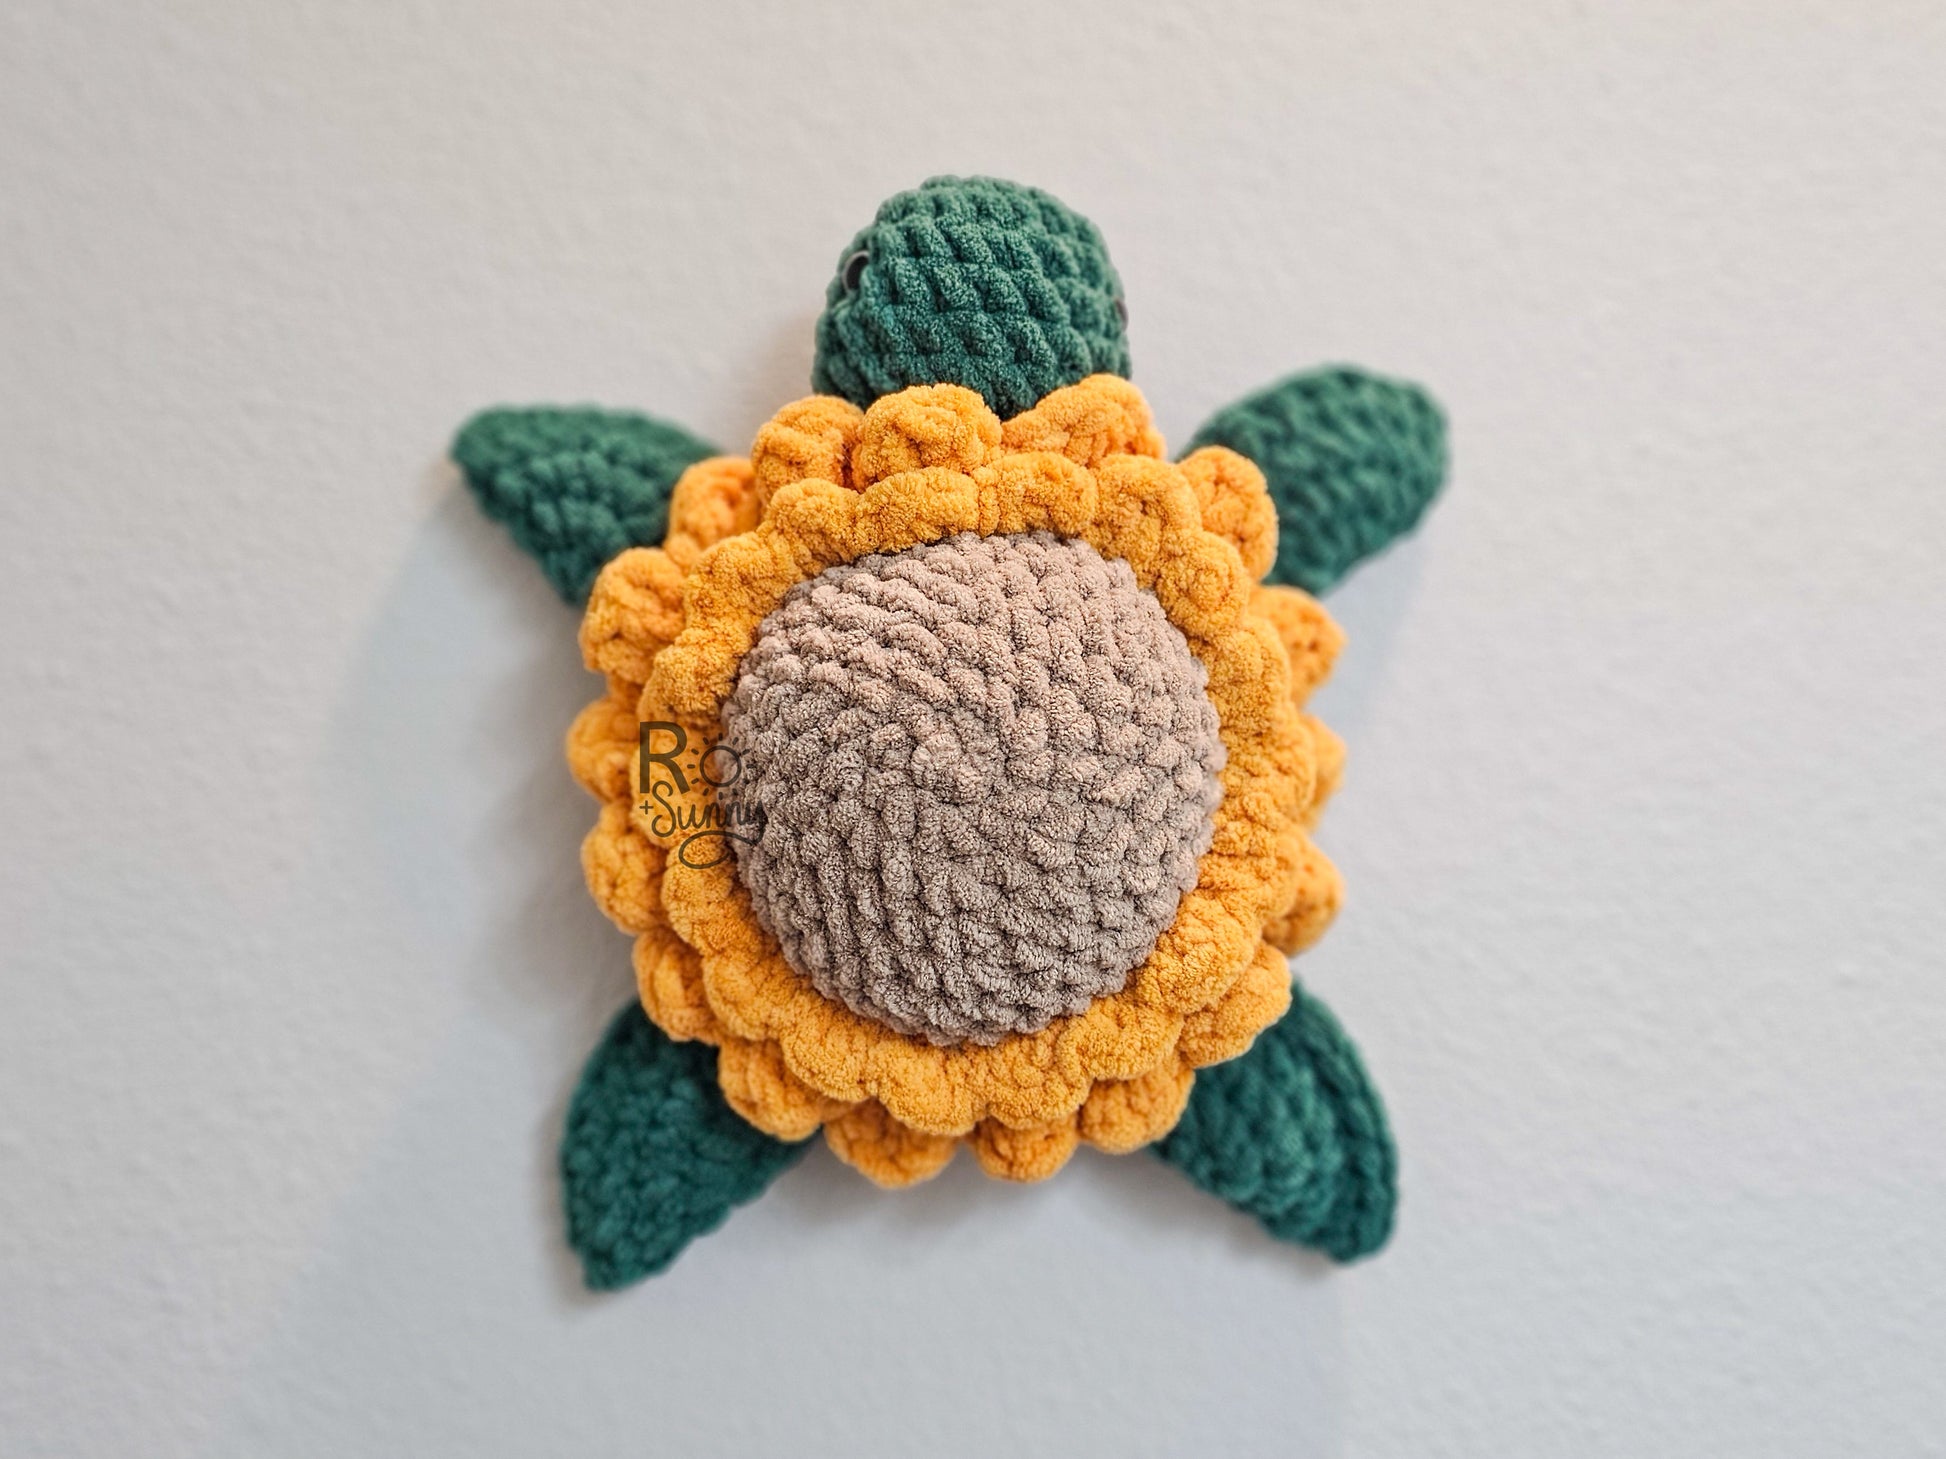 Sunflower, Overhead View, Lying Flat - Crochet sea turtle with a forest green body and golden yellow sunflower shell. The center of the sunflower is sandy brown. 